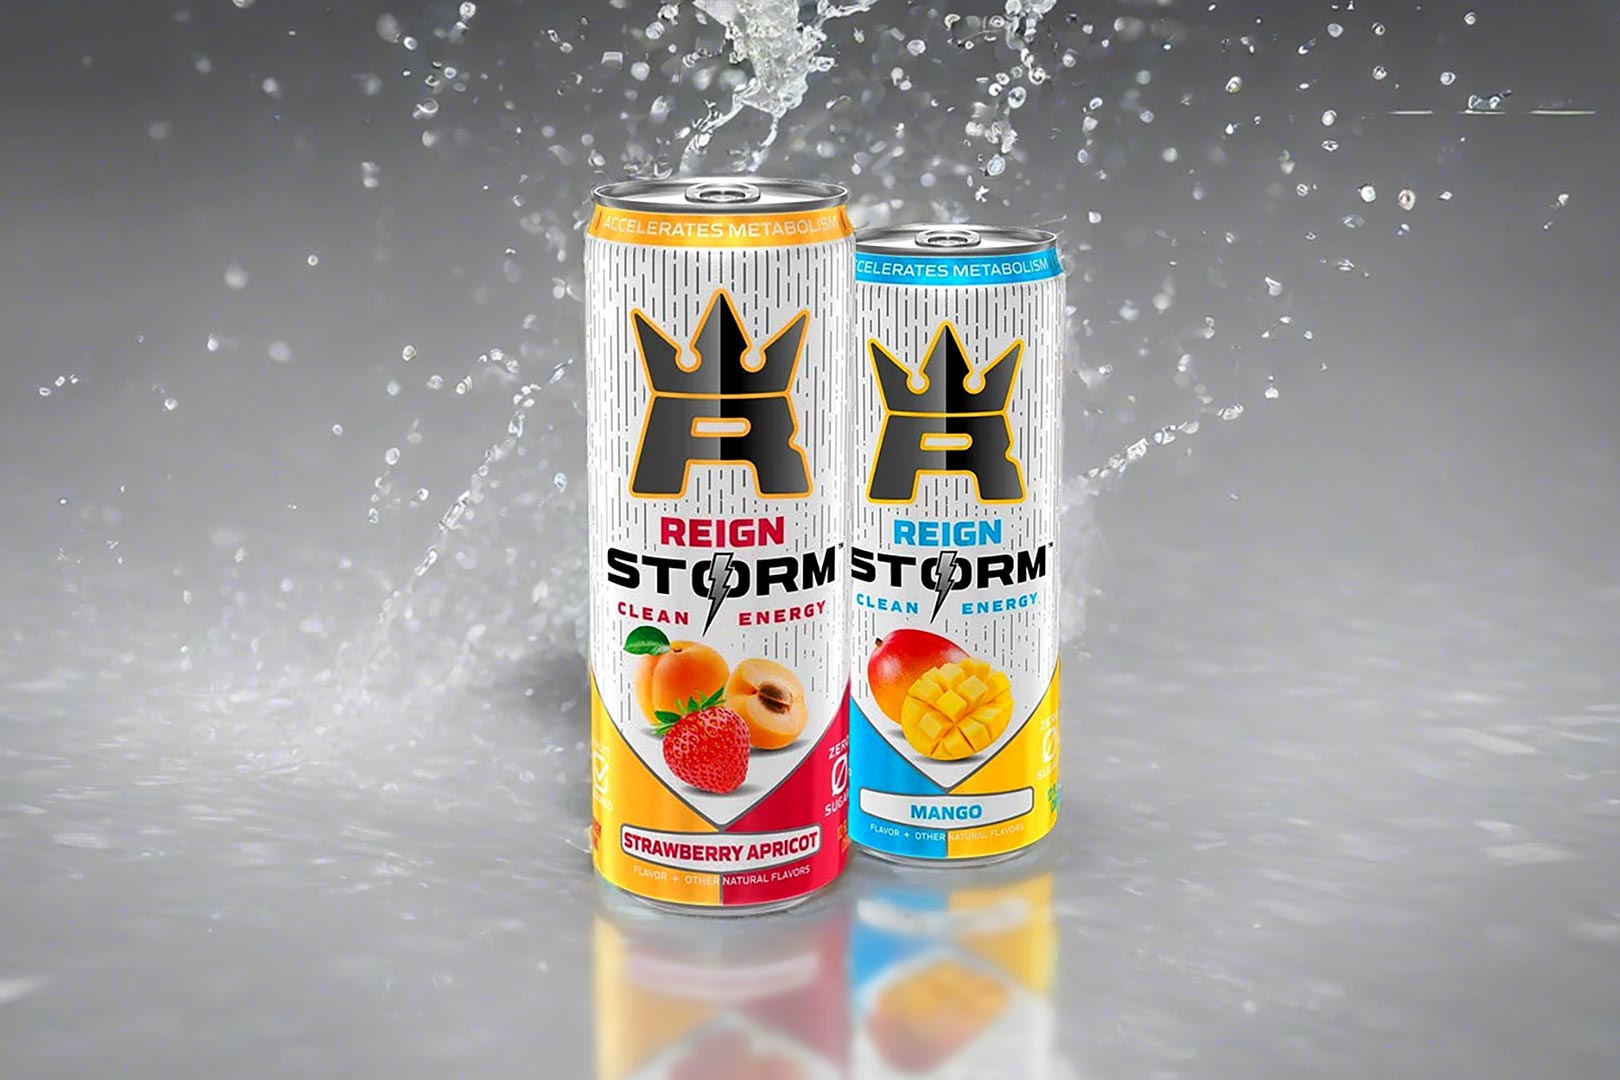 Mango And Strawberry Apricot Reign Storm